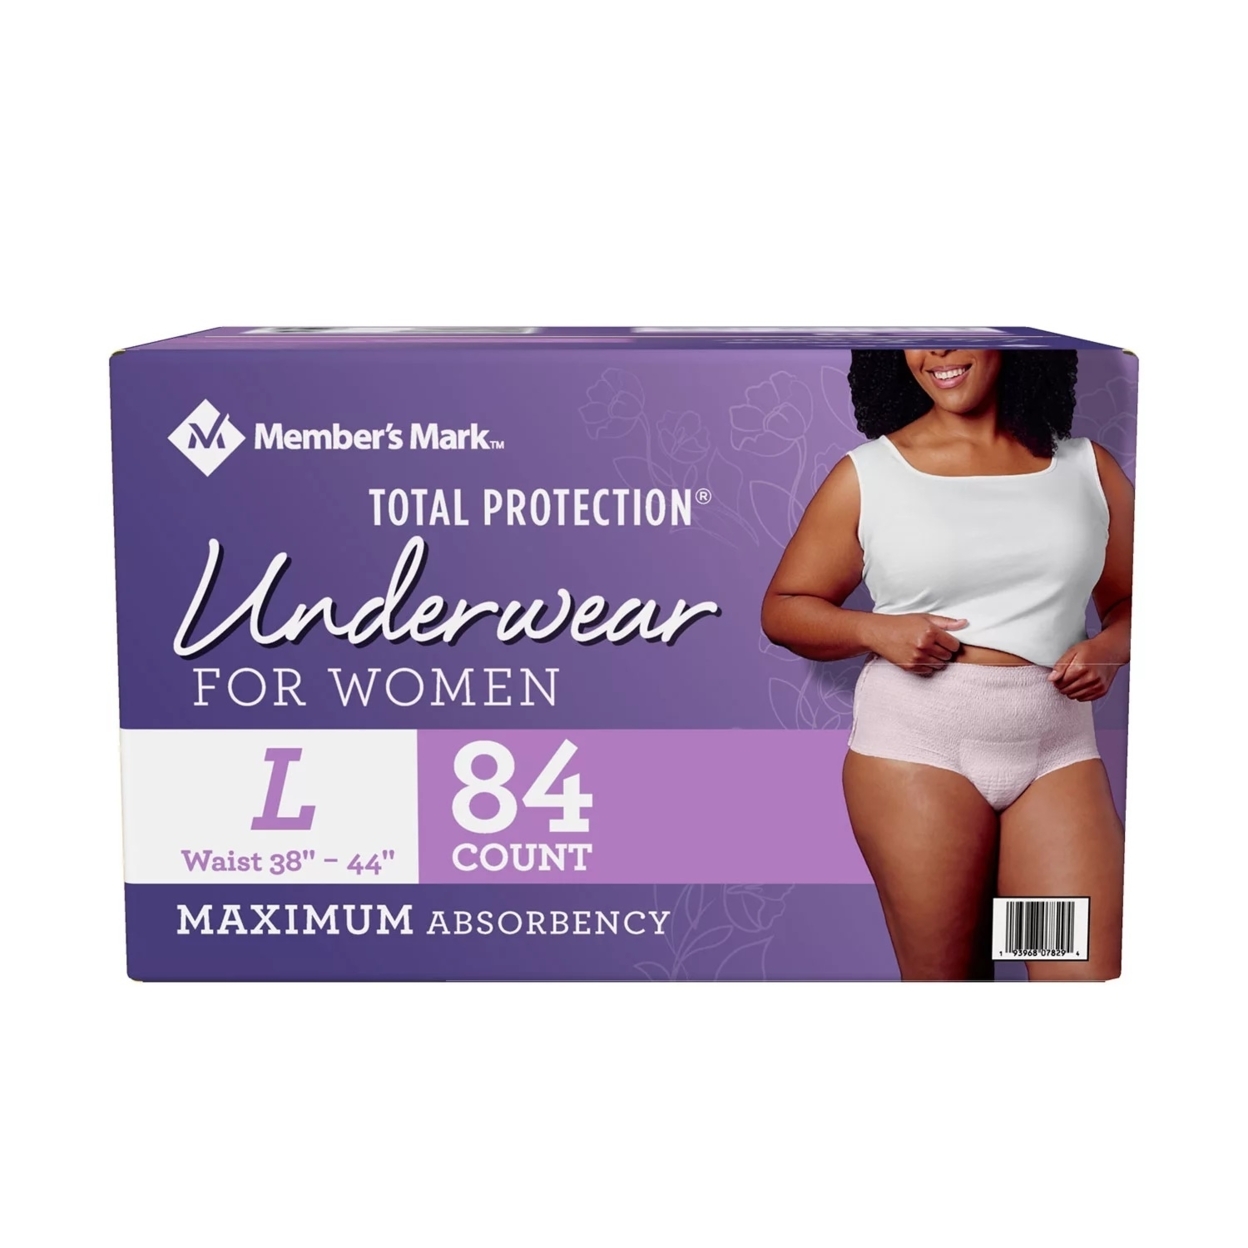 Member's Mark Total Protection Underwear For Women, Large (84 Count)